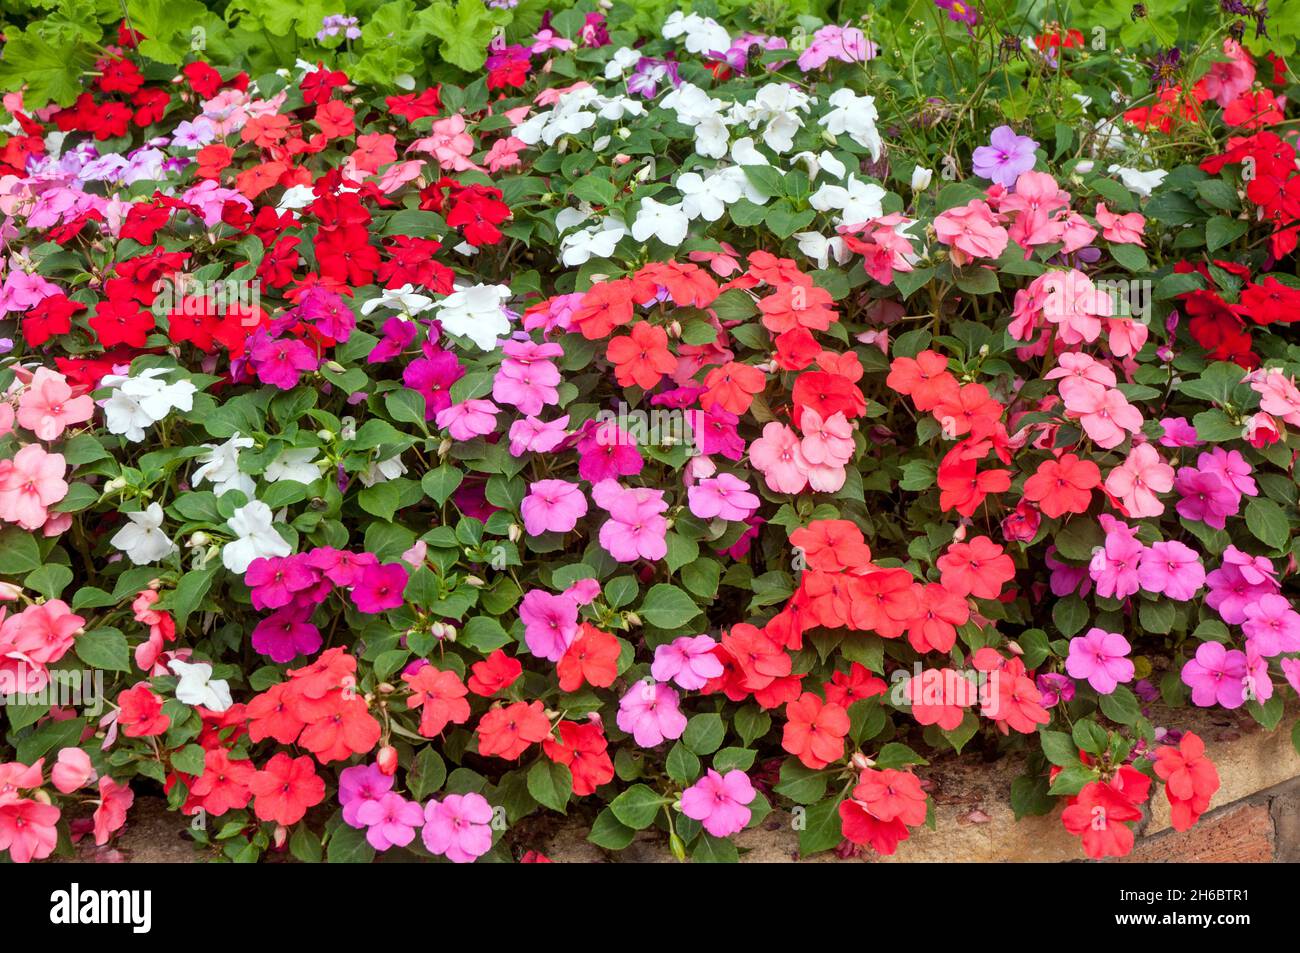 Impatiens Busy Lizzie an annual in mixed colours of red pink salmon orange and white growing in a flower bed in sumer. Stock Photo